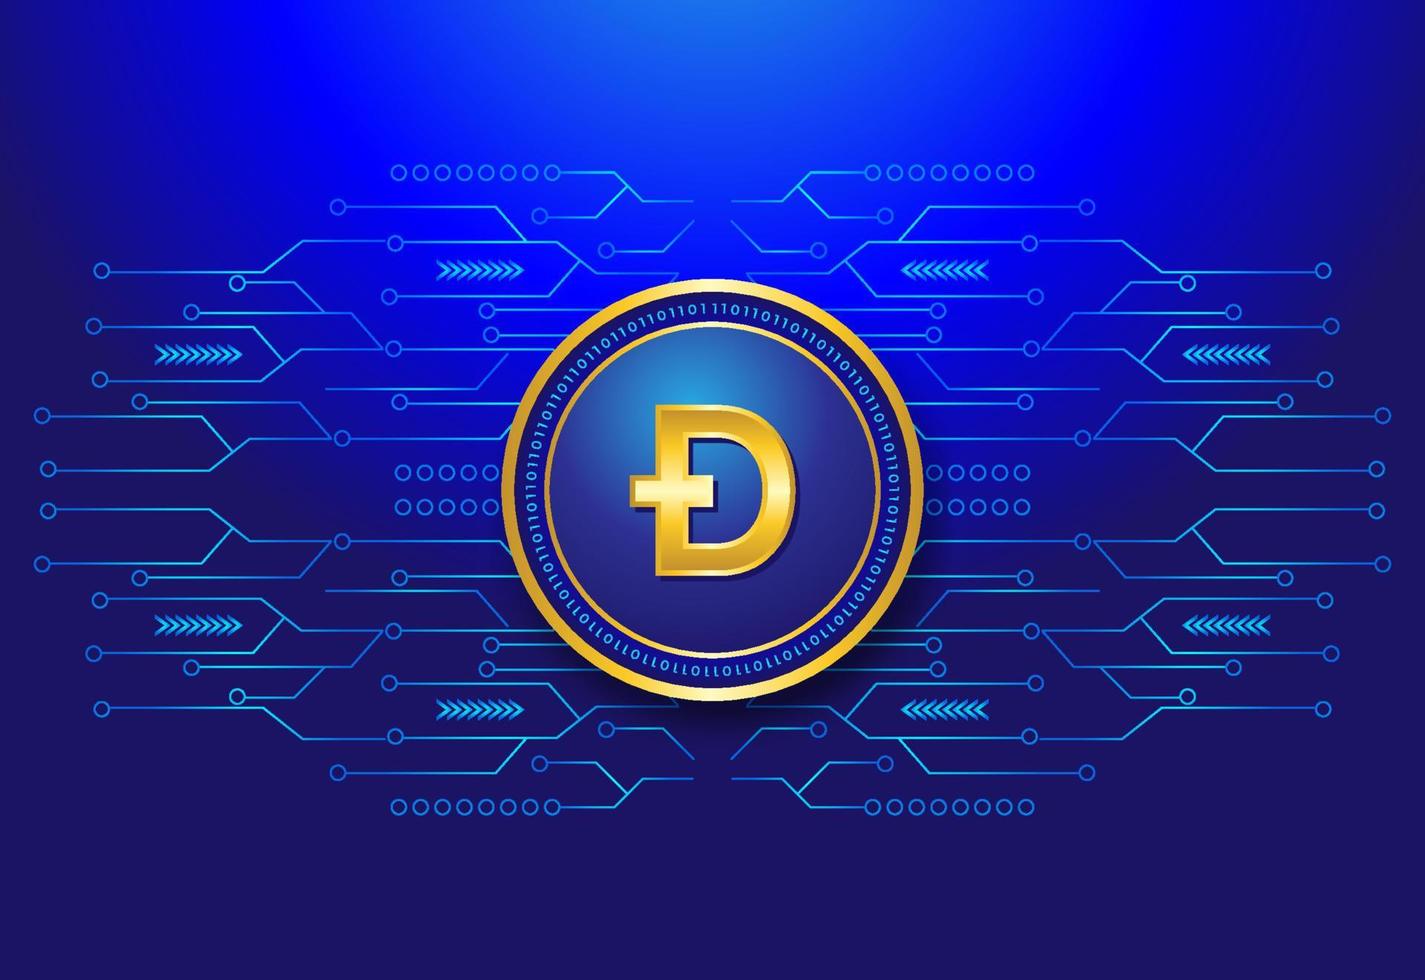 doge coin cryptocurrency symbol on network background vector